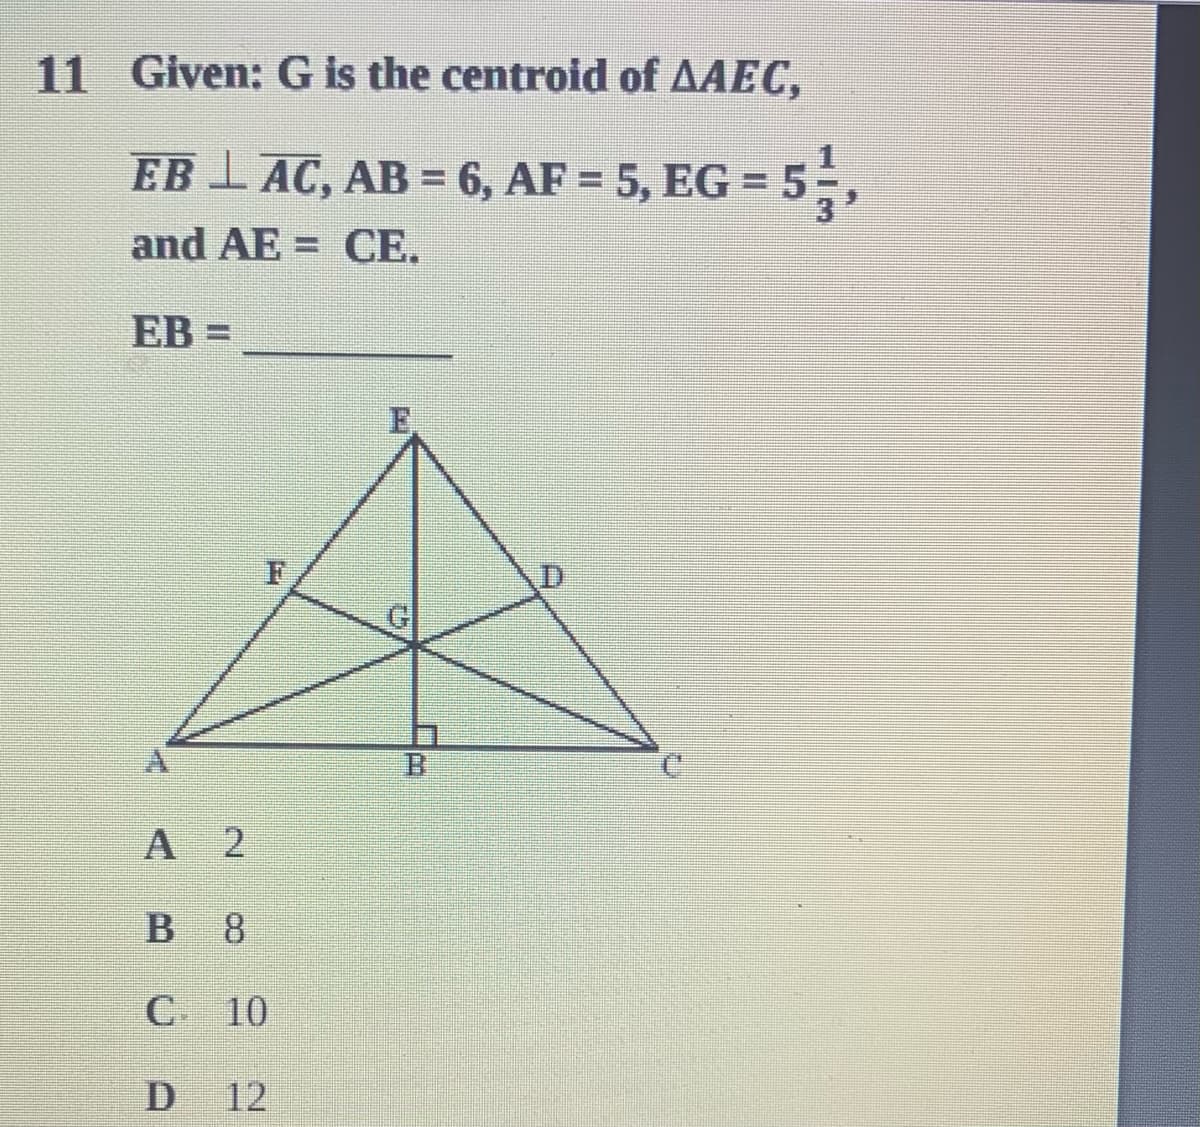 11 Given: G is the centroid of AAEC,
EB I AC, AB = 6, AF = 5, EG = 5
55,
and AE = CE.
EB =
A 2
8.
C 10
12
